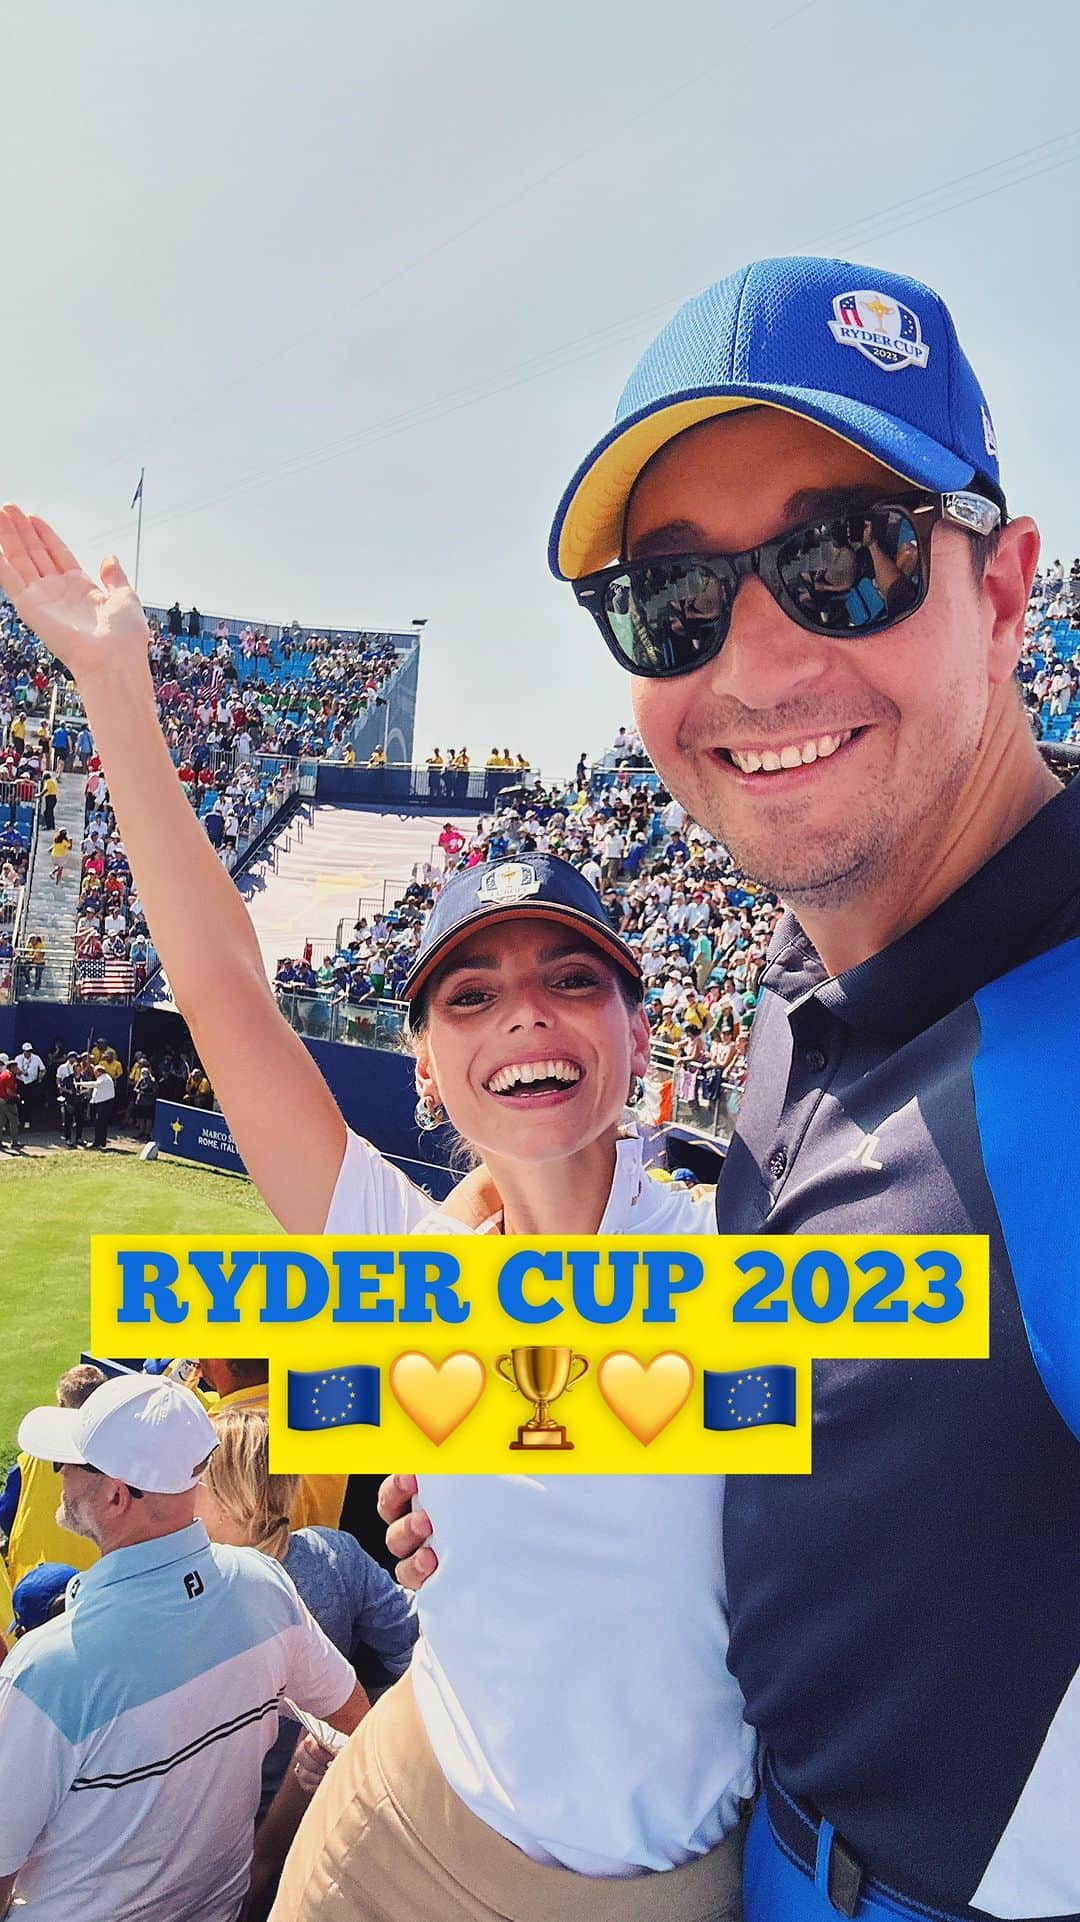 @LONDON | TAG #THISISLONDONのインスタグラム：「⛳️🏌🏽‍♂️ @MrLondon & @Alice.Sampo with our #London To The #RyderCup highlights! 🔥 What an amazing weekend! 🙌🏼😭💪🏼 Congrats @RyderCupEurope on a sensational win!! 🇪🇺💛🏆💛🇪🇺 History made!! 🙌🏼💪🏼🙌🏼    Great to see you @bonnie.and.slice 👋🏼💛💙 ___________________________________________  #🇬🇧 #golf #golflife #golfswing #golfaddict #golfstagram #golfer #golfcourse #🇮🇹 #rome #marcosimone #rydercup #rydercup2023 #europe #usa #🇺🇸 #italy #italia #italian #italytravel #italianstyle #jlindeberg #rydercupeurope #⛳️ #🏌🏽‍♂️#🏌🏻‍♀️」